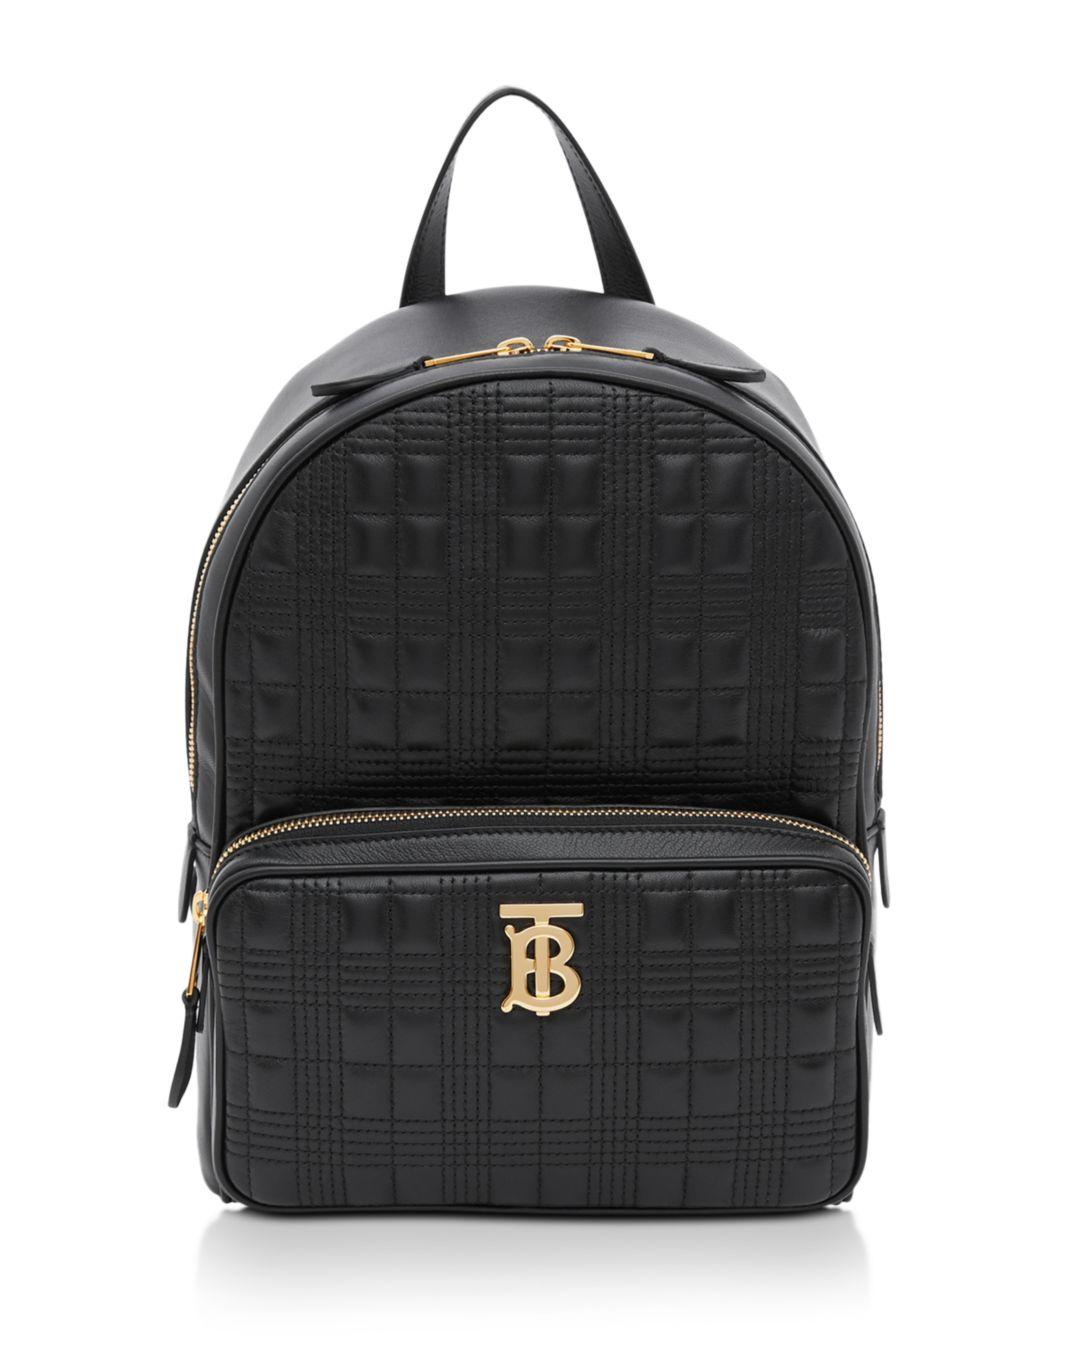 Burberry Leather Quilted Check Lambskin Backpack in Black | Lyst